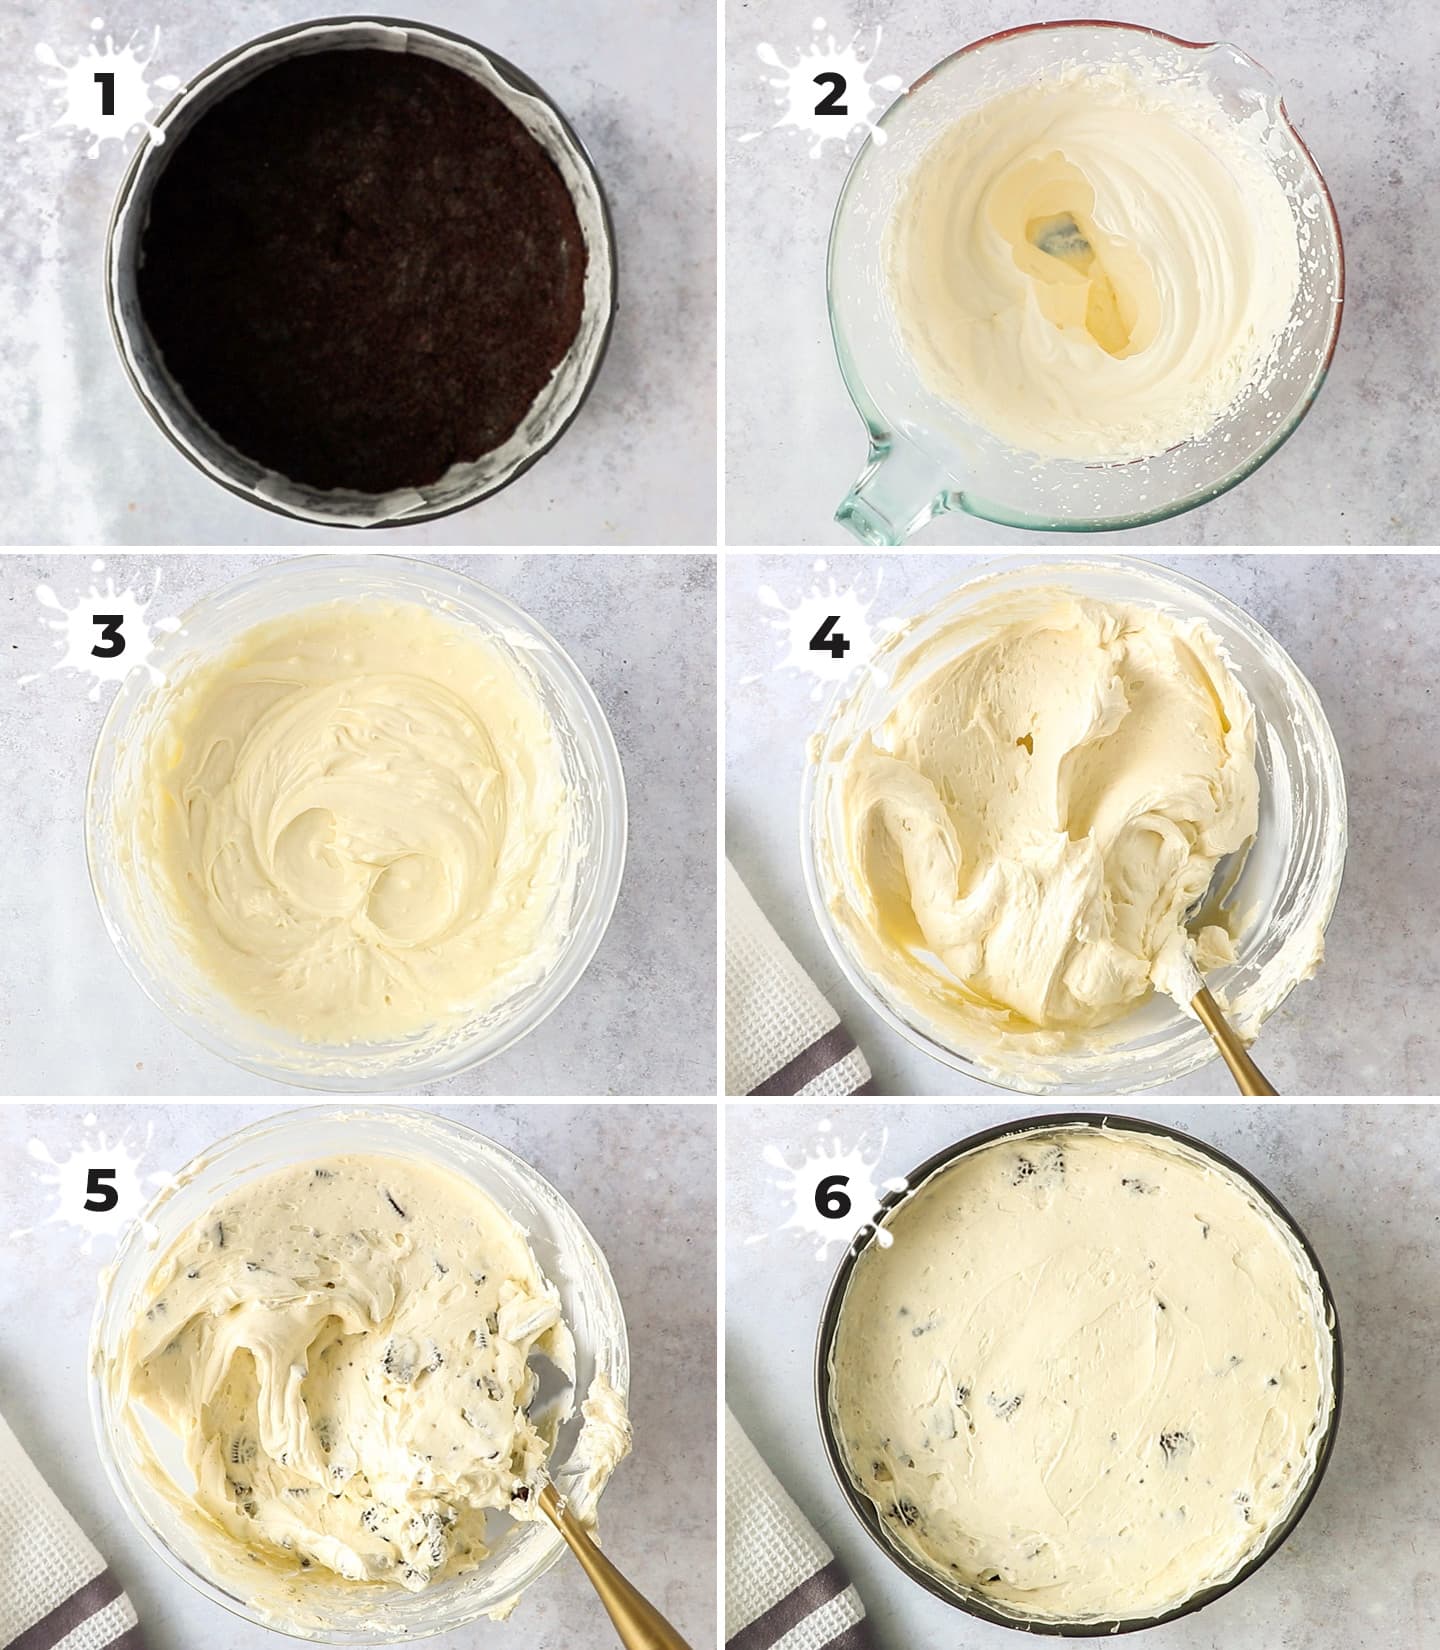 A collage of 6 images showing how to make oreo cheesecake.